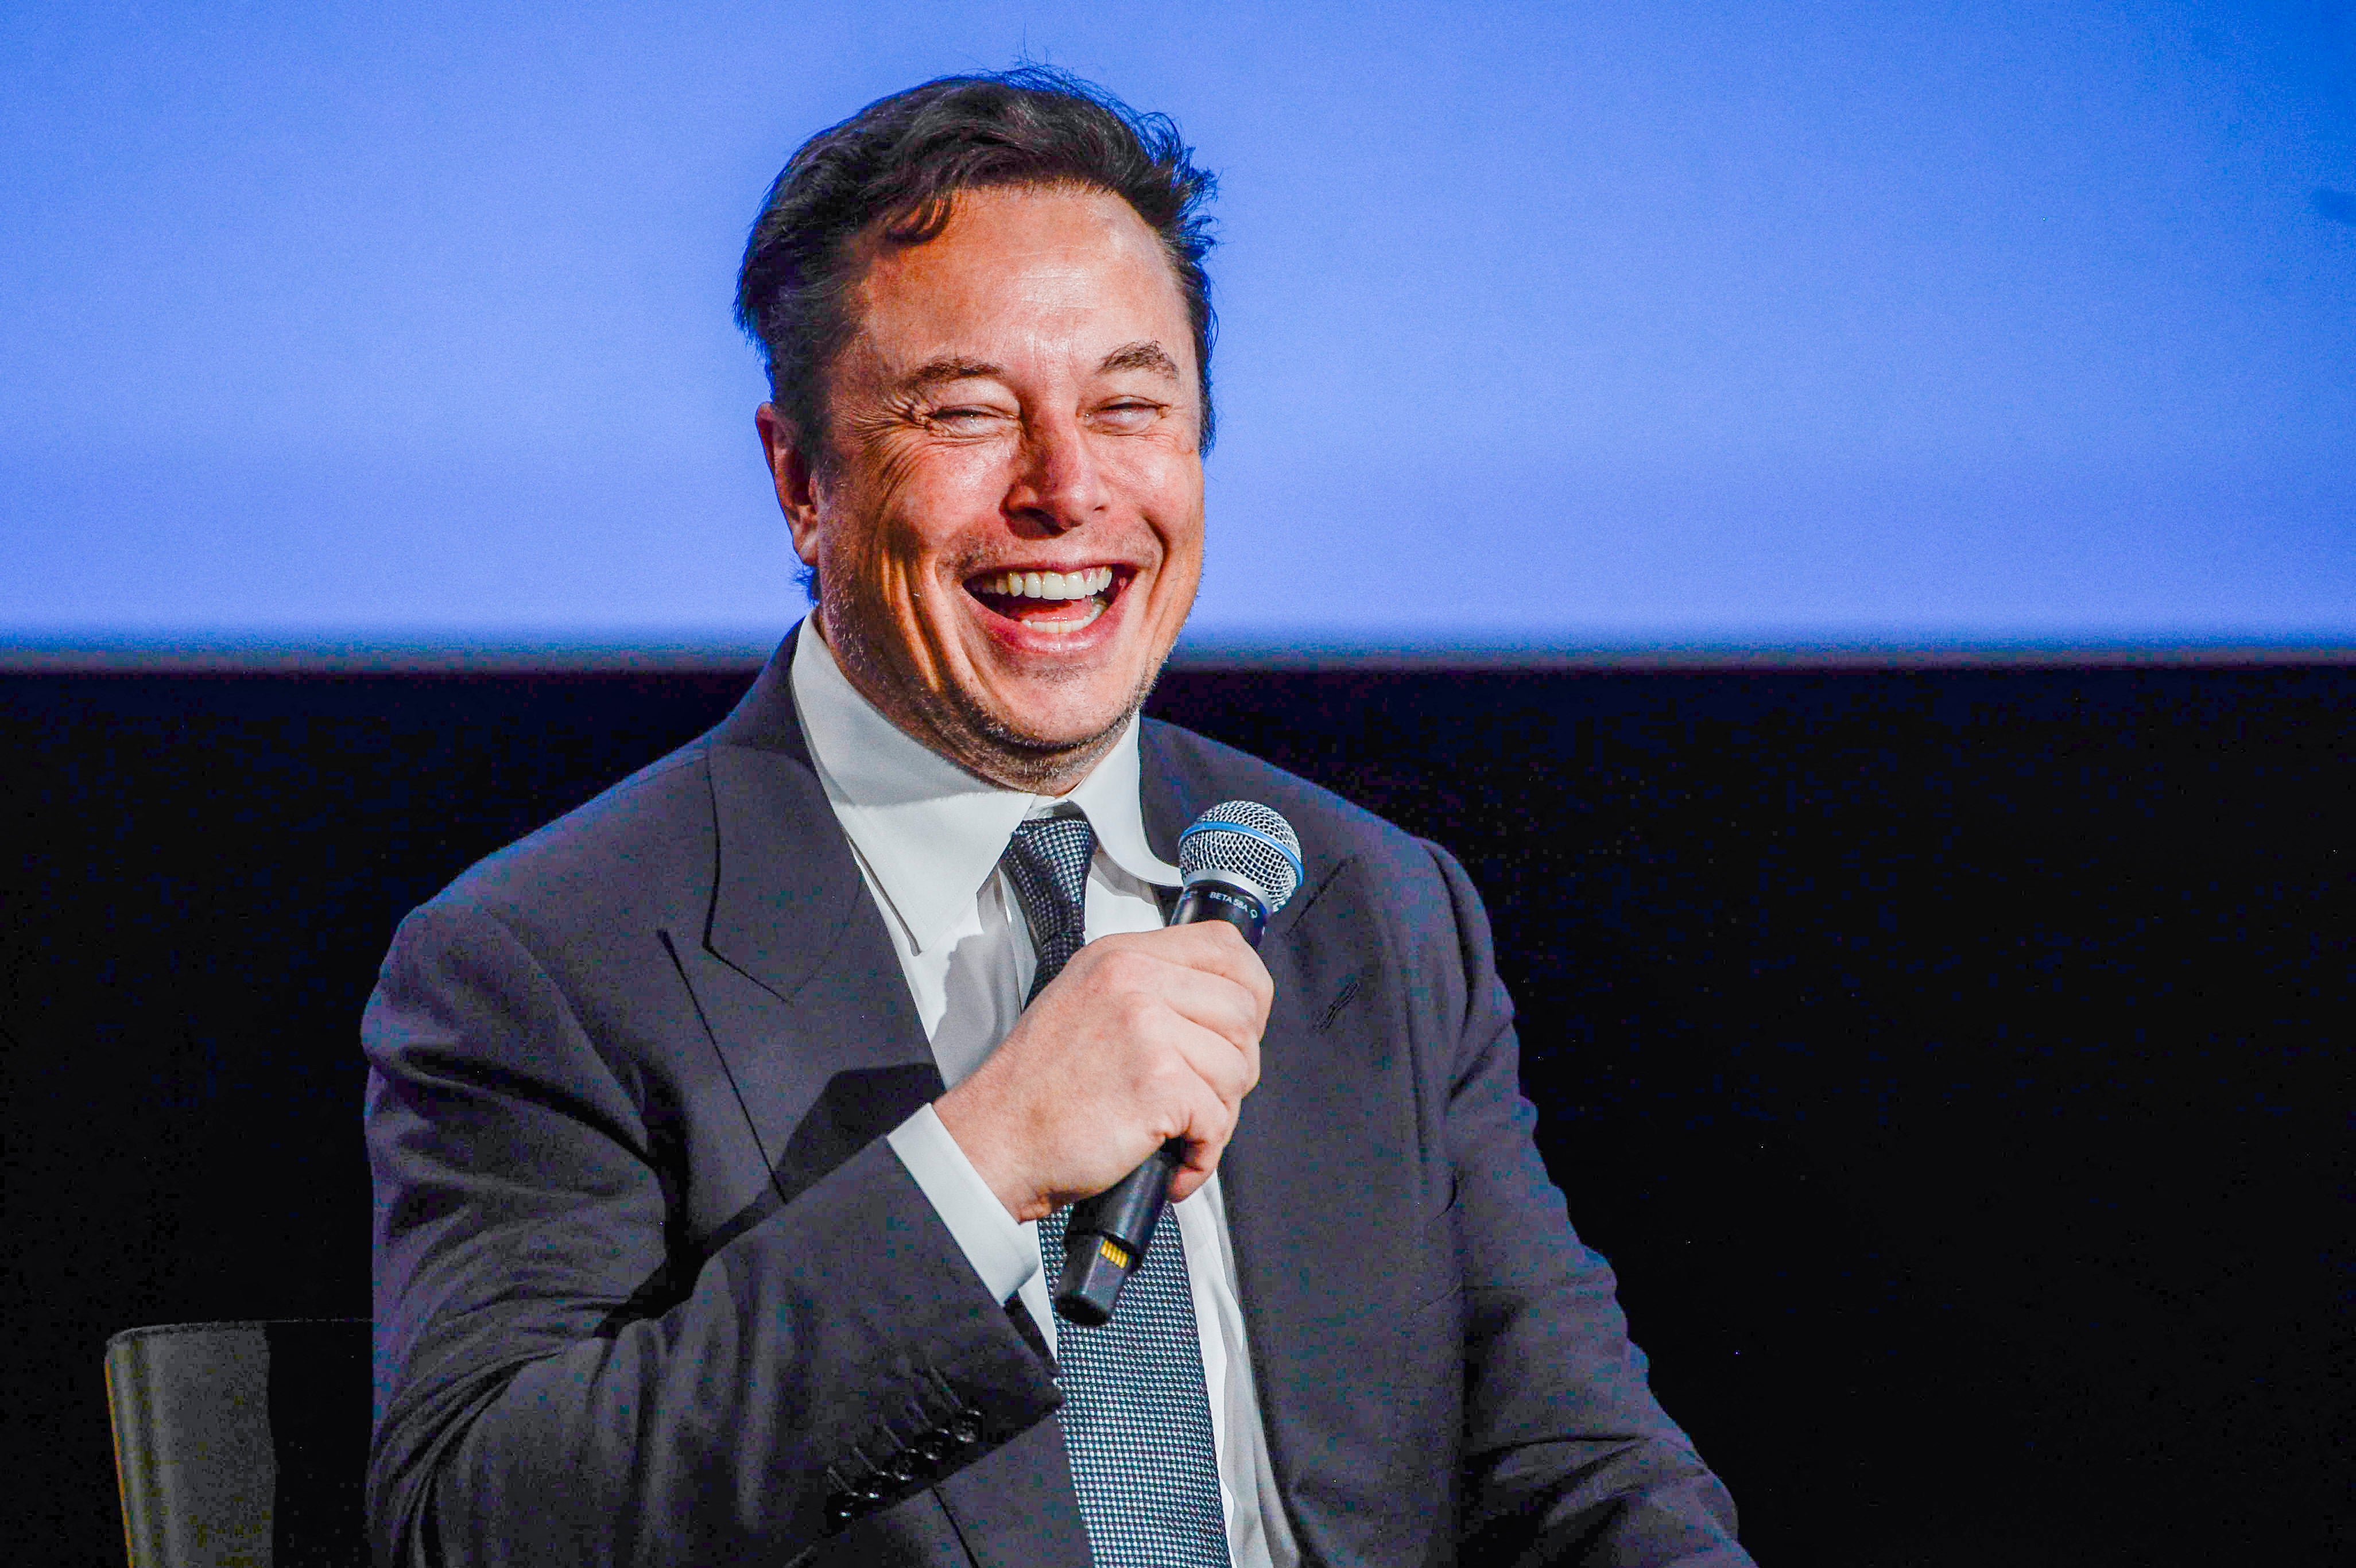 Elon Musk is officially America’s wealthiest man